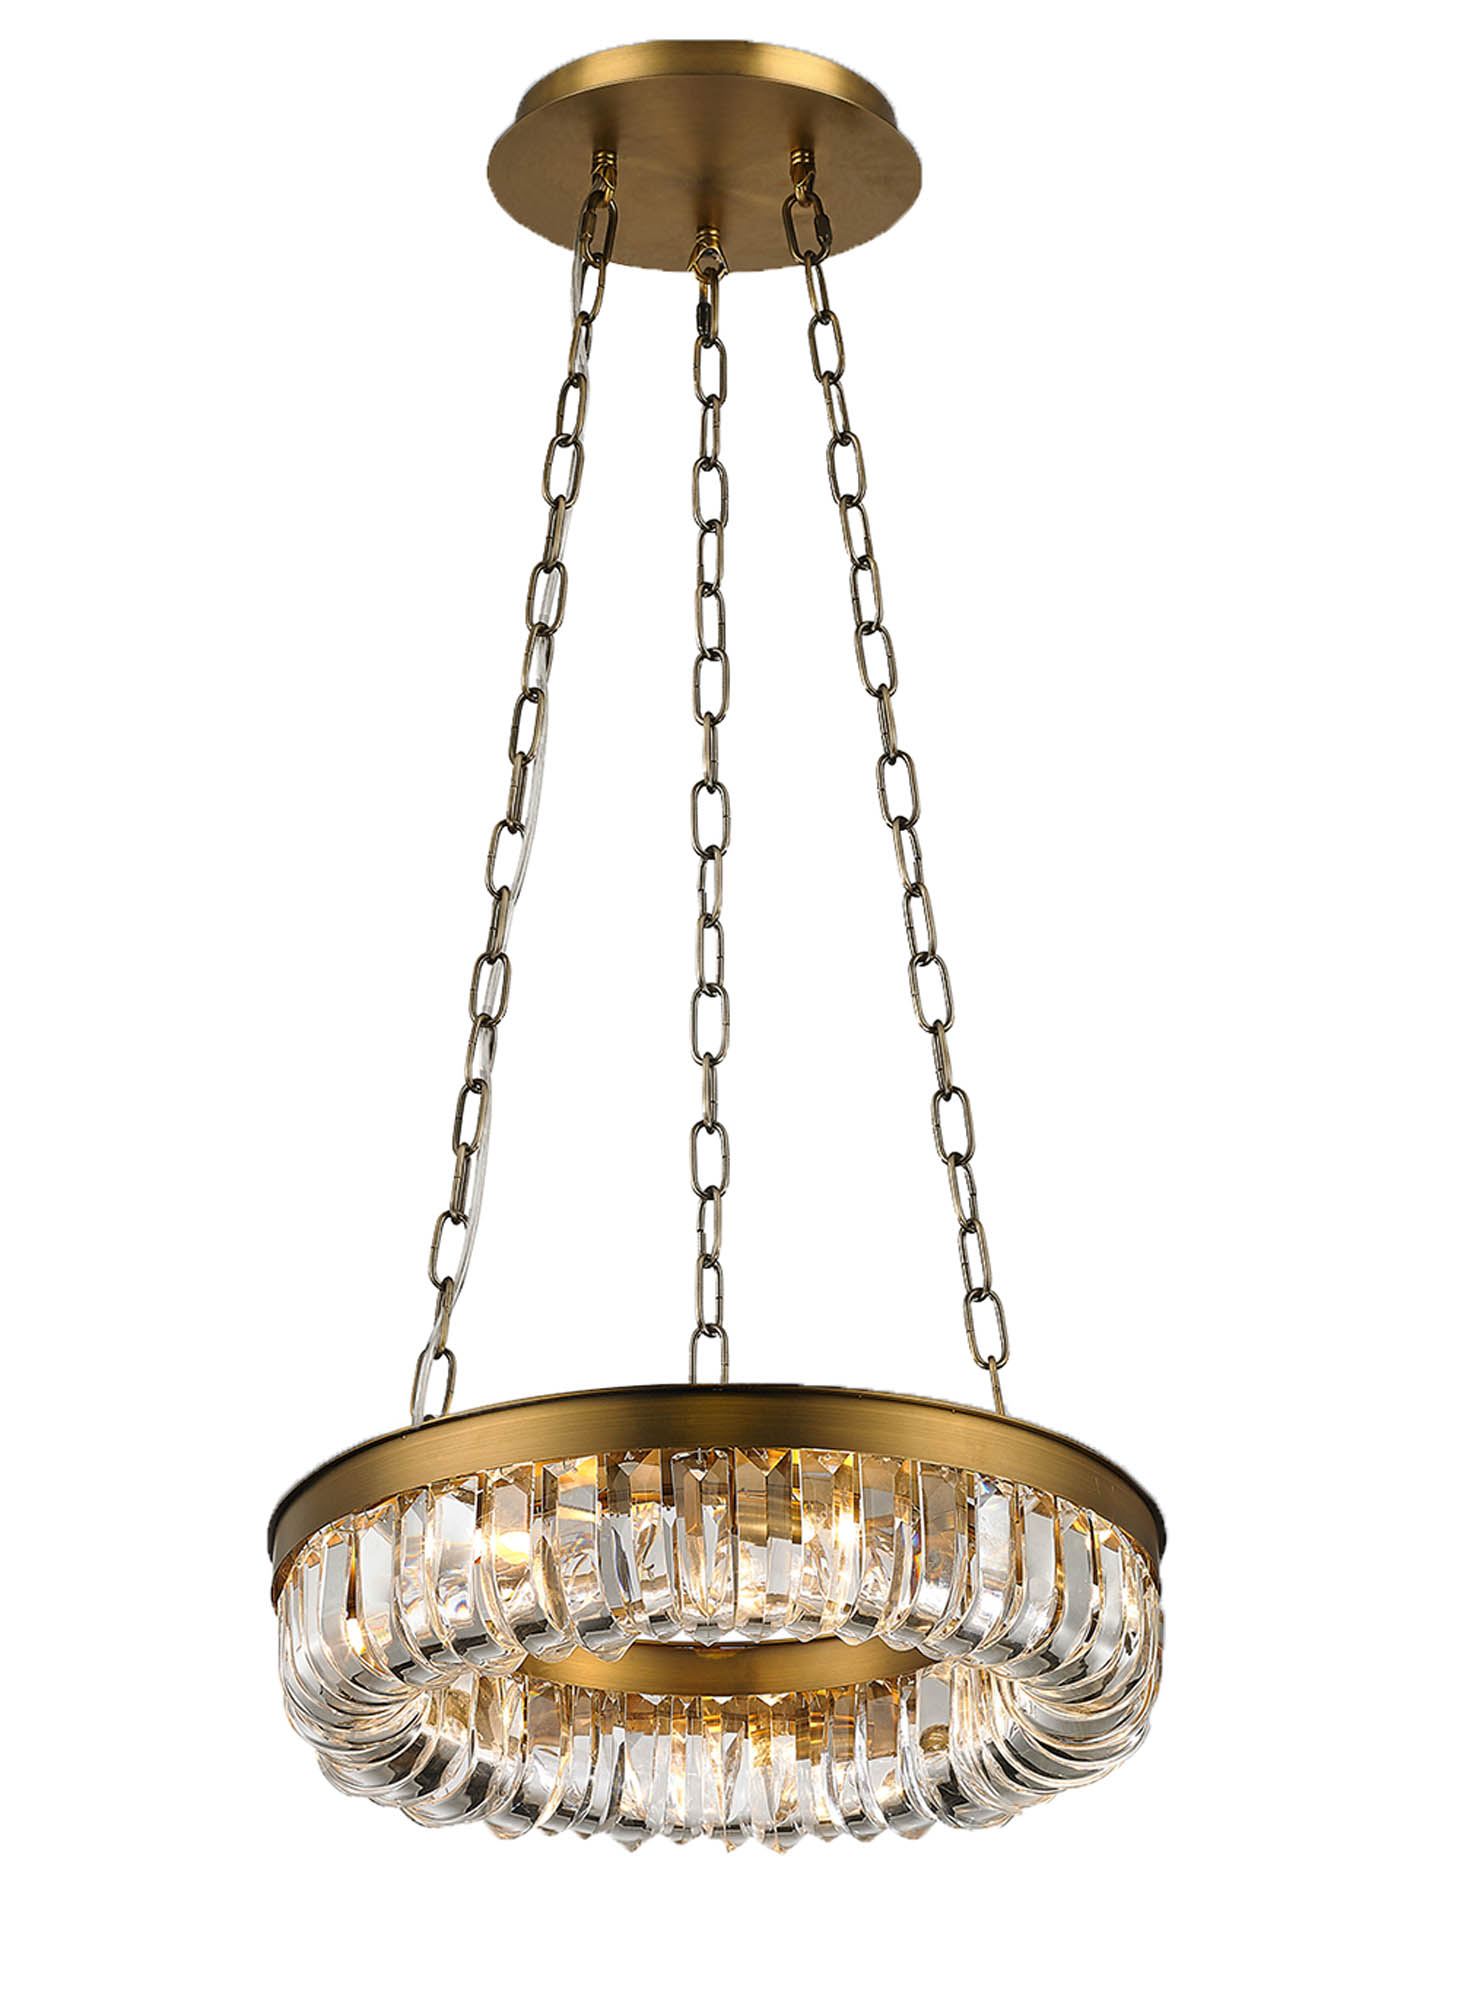 MD7197-9  Special Pendant 9 Light